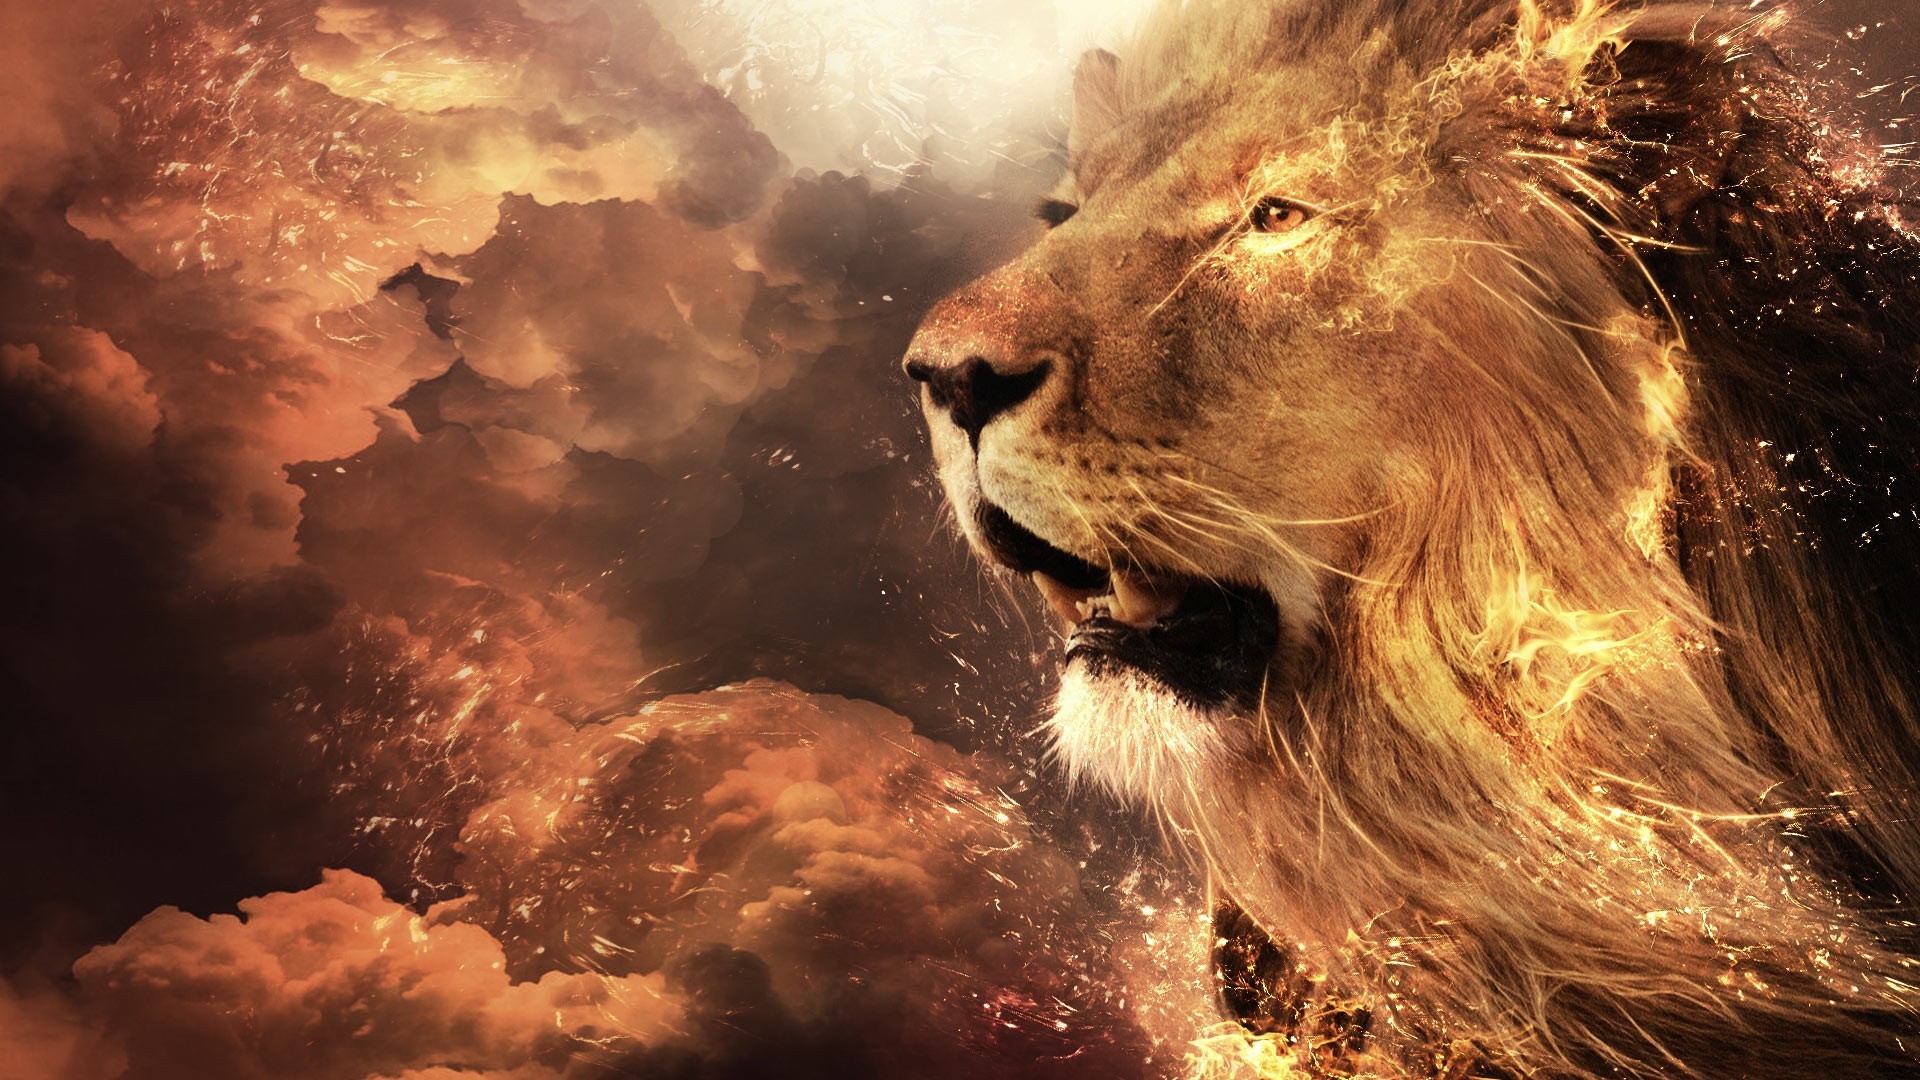 1920x1080 Roaring, Lion, High, Resolution, Desktop, Background, Download, Photos,  Free, Best Backgrounds, Wallpapers For Large Screens, Display, 1920Ã1080  Wallpaper ...